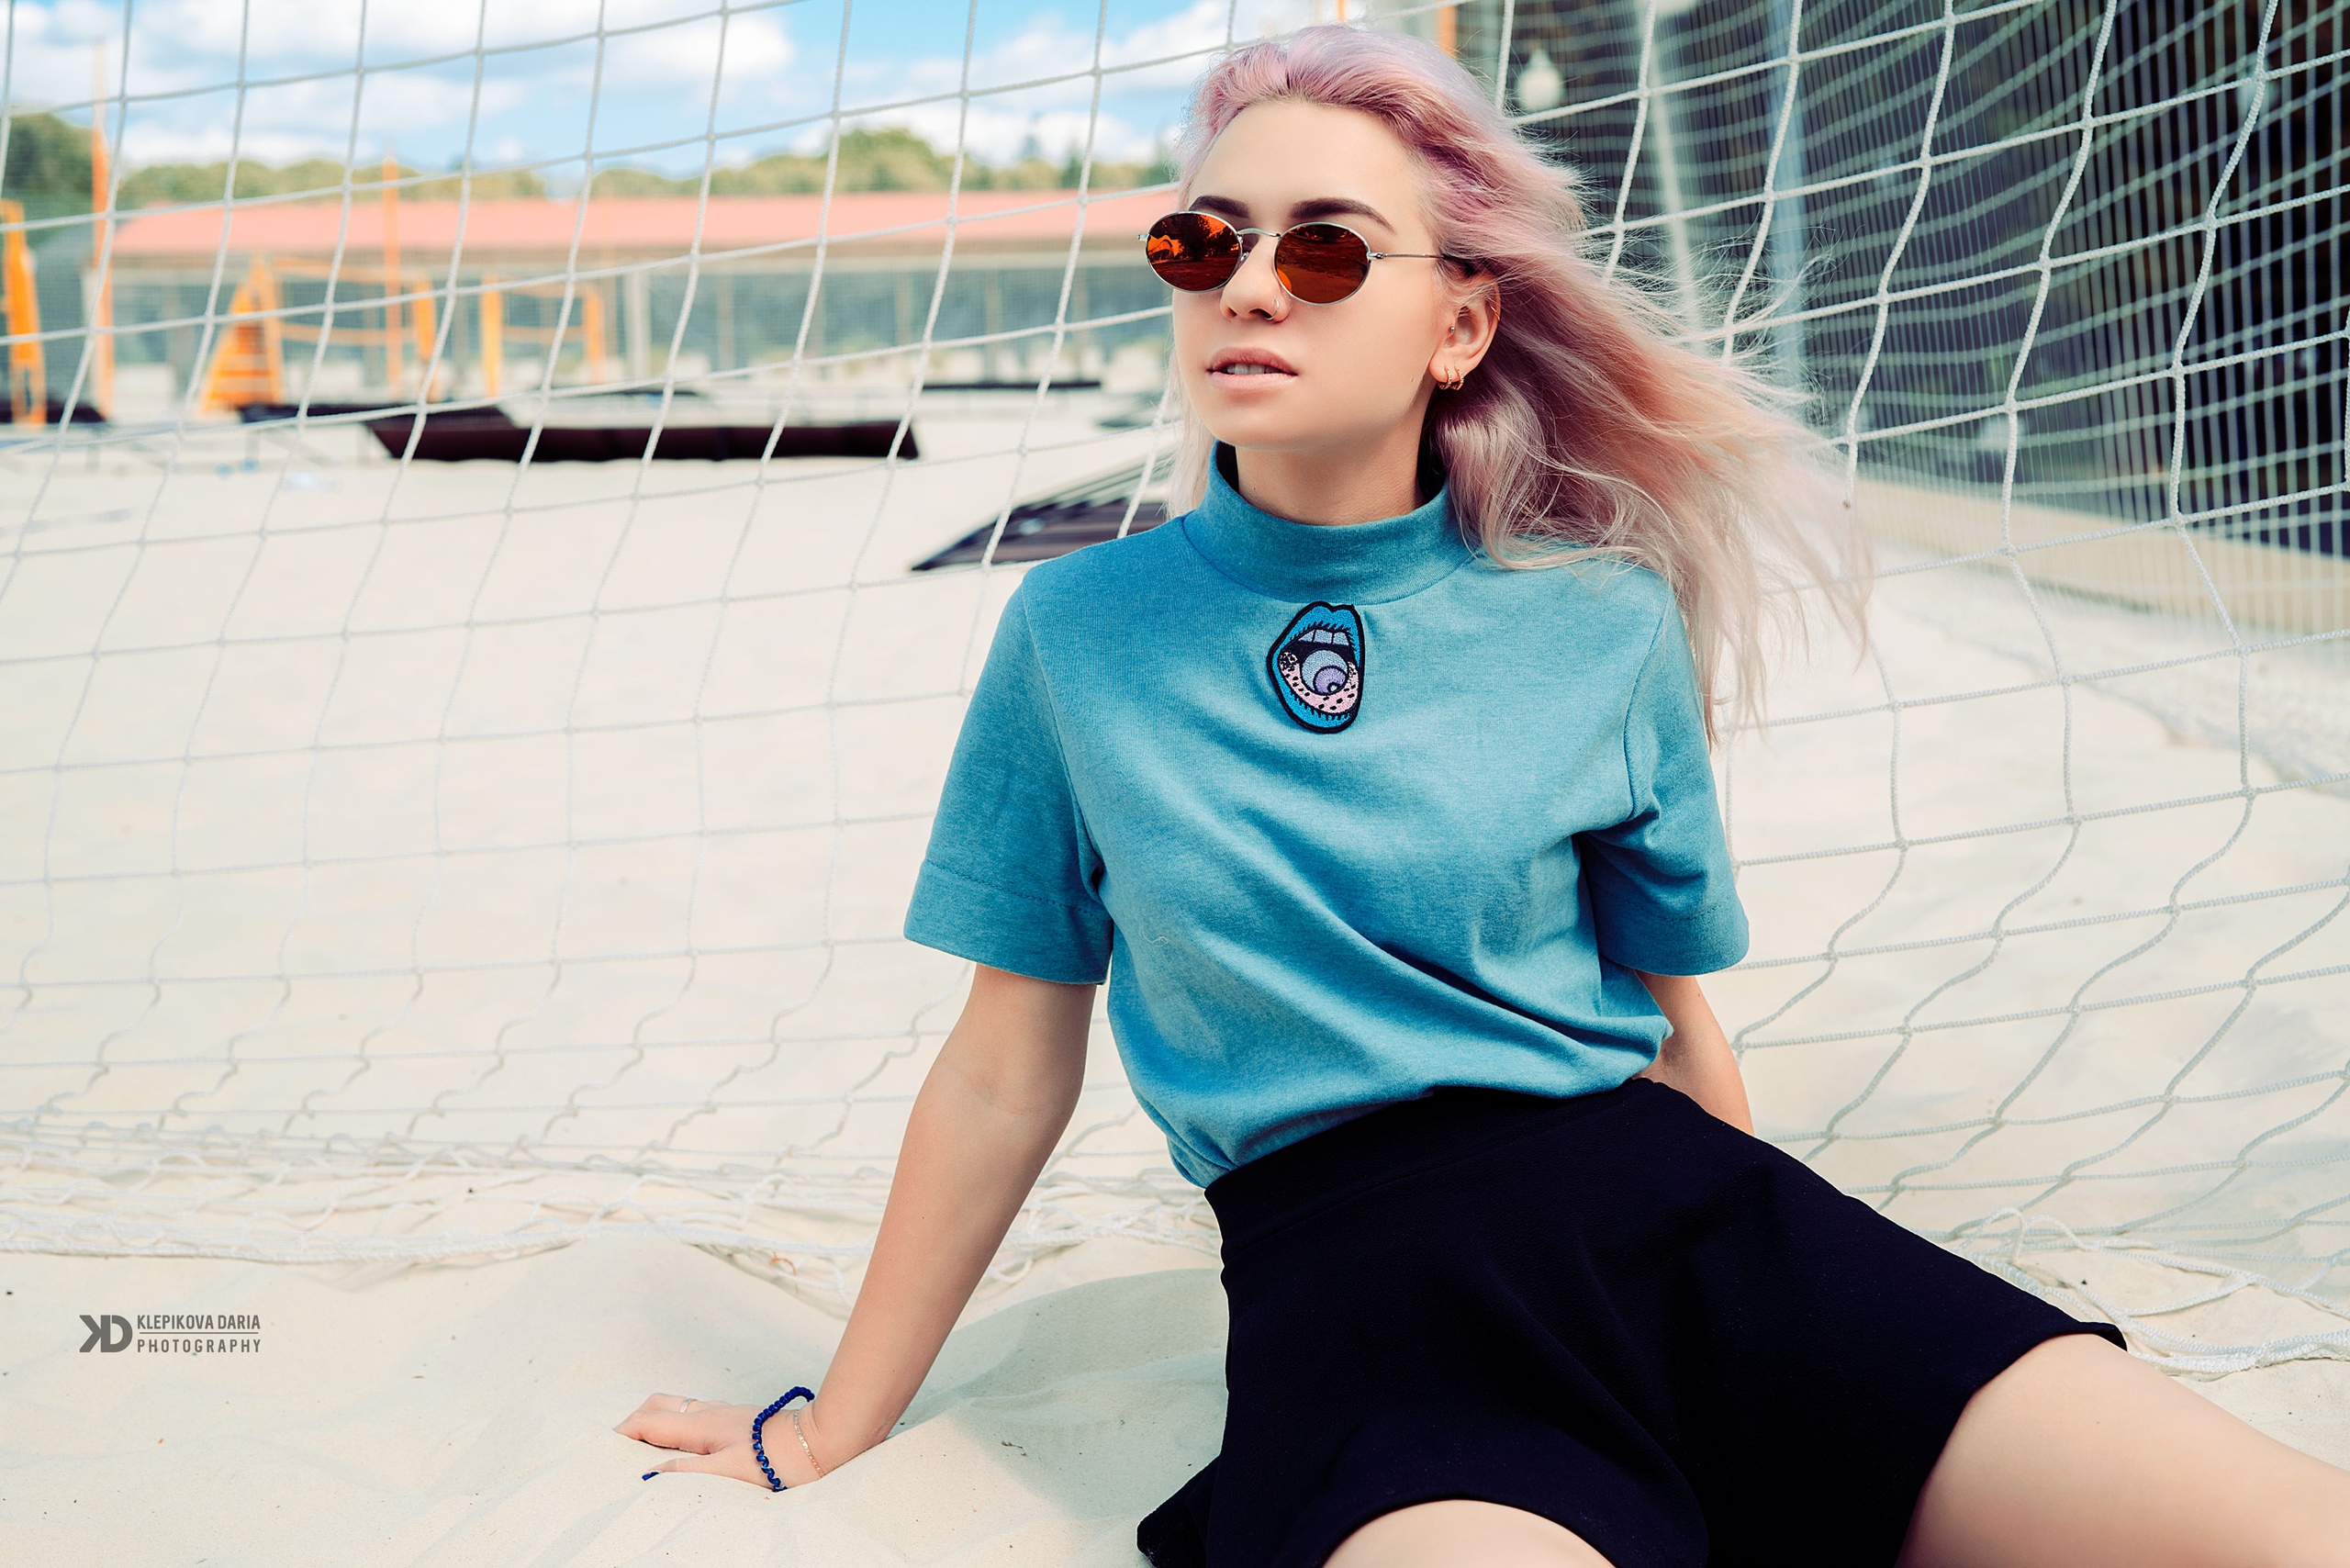 People 2560x1708 women model dyed hair women with shades sunglasses outdoors portrait T-shirt miniskirt nose ring depth of field earring sitting Daria Klepikova women outdoors watermarked